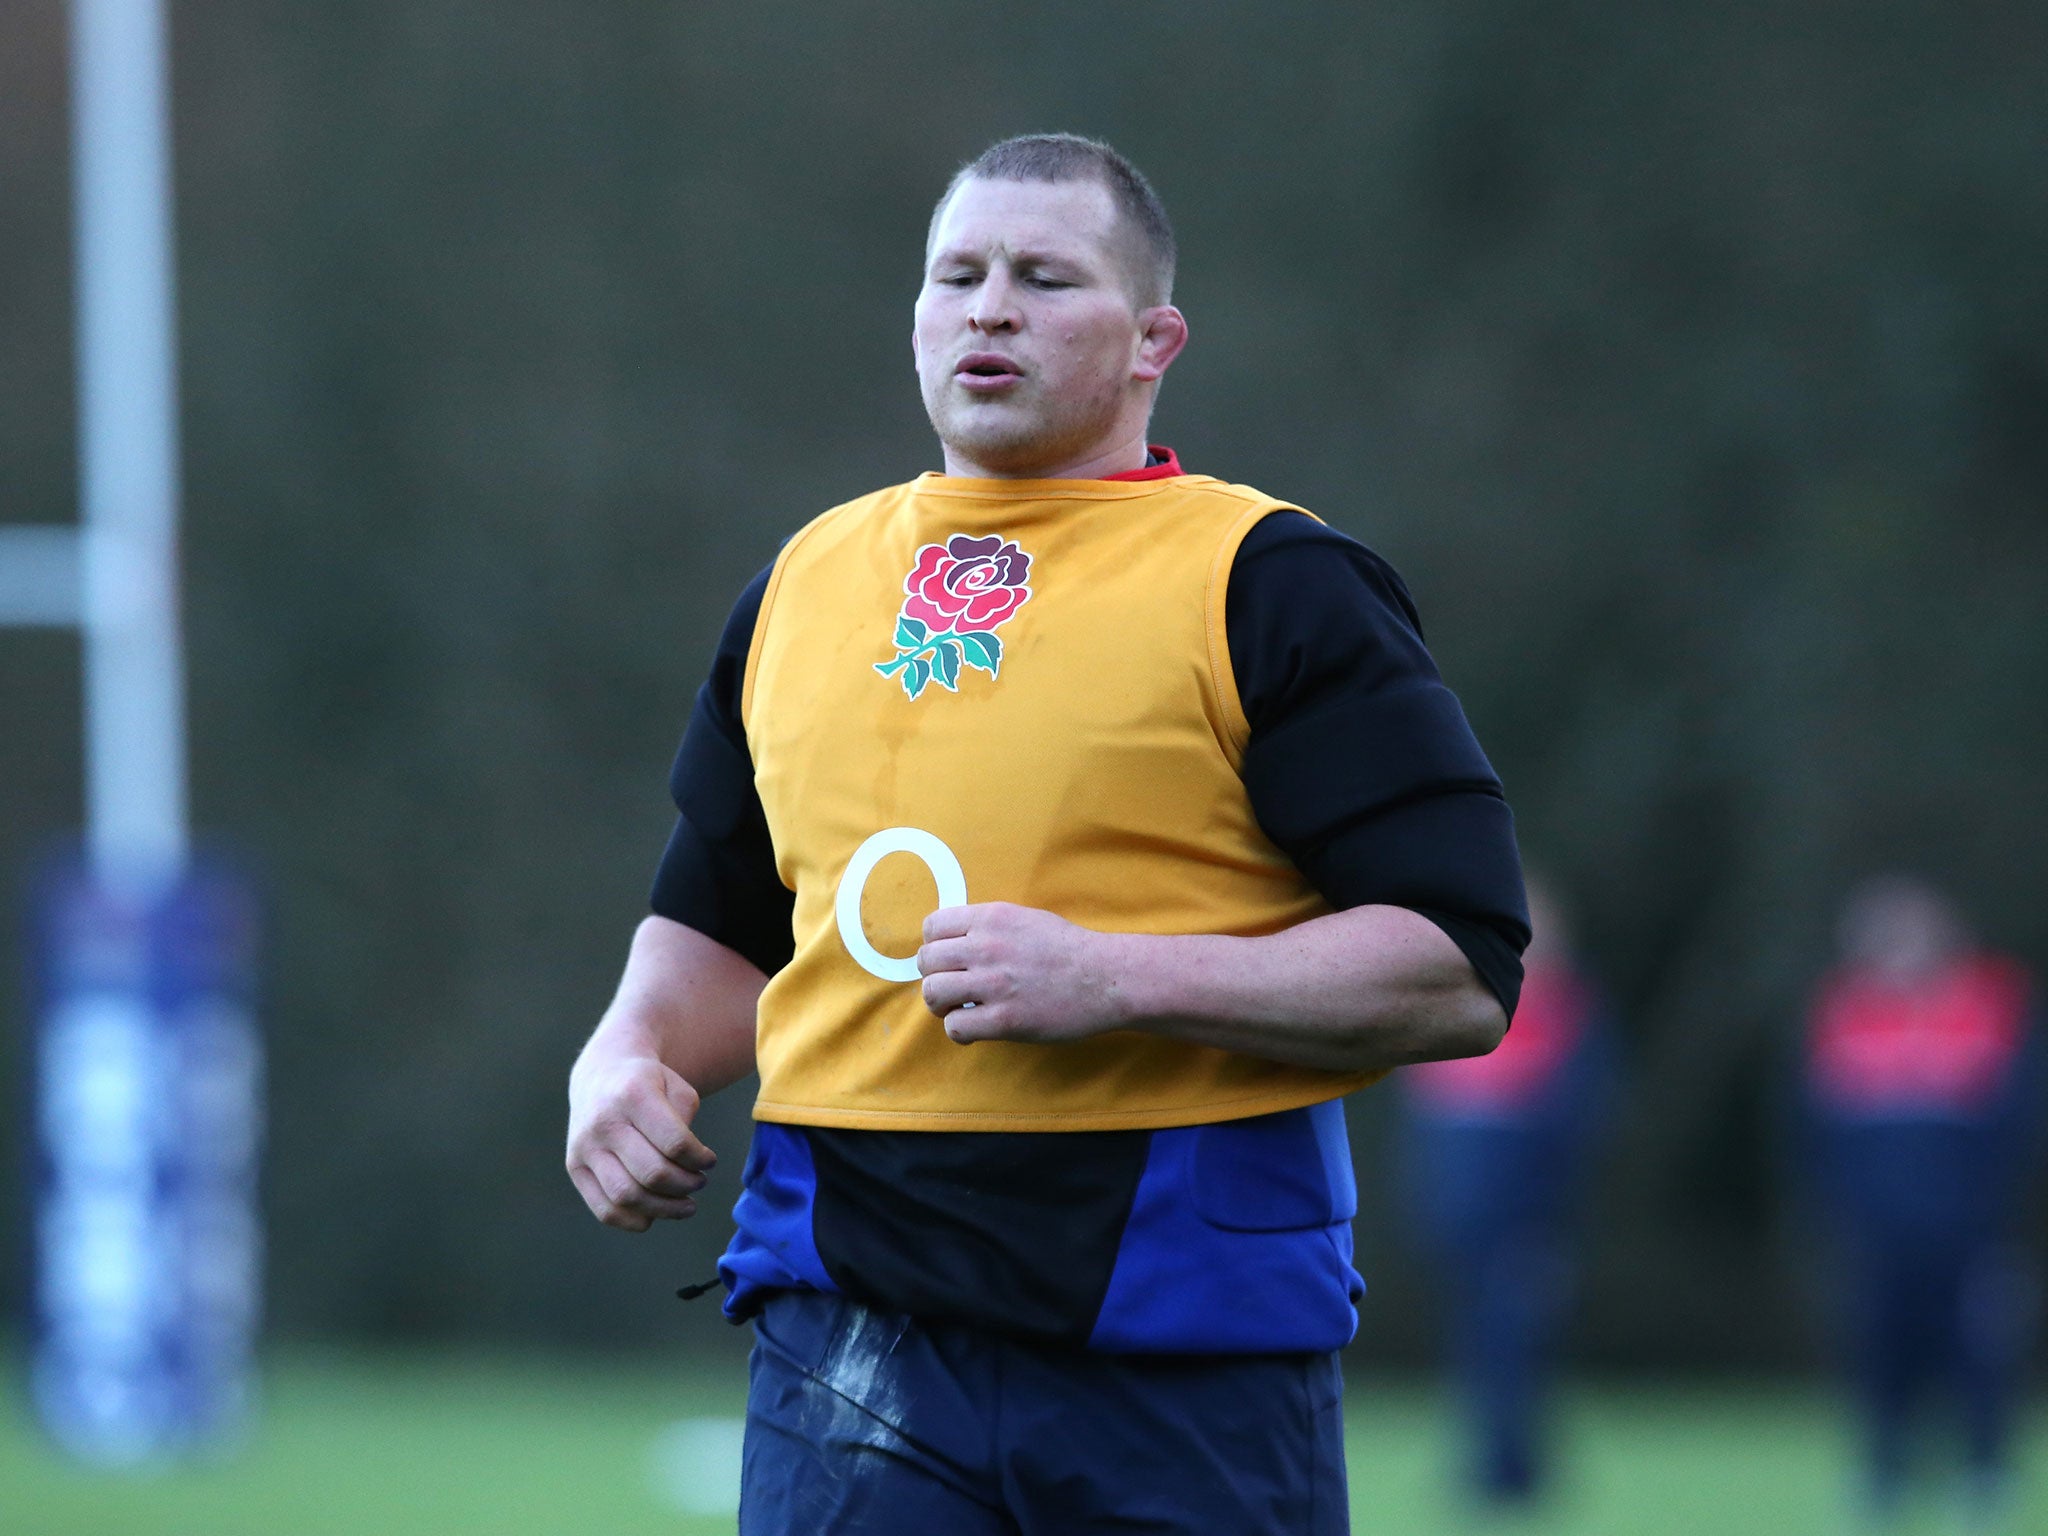 Dylan Hartley will captain England for the first time since replacing Chris Robshaw